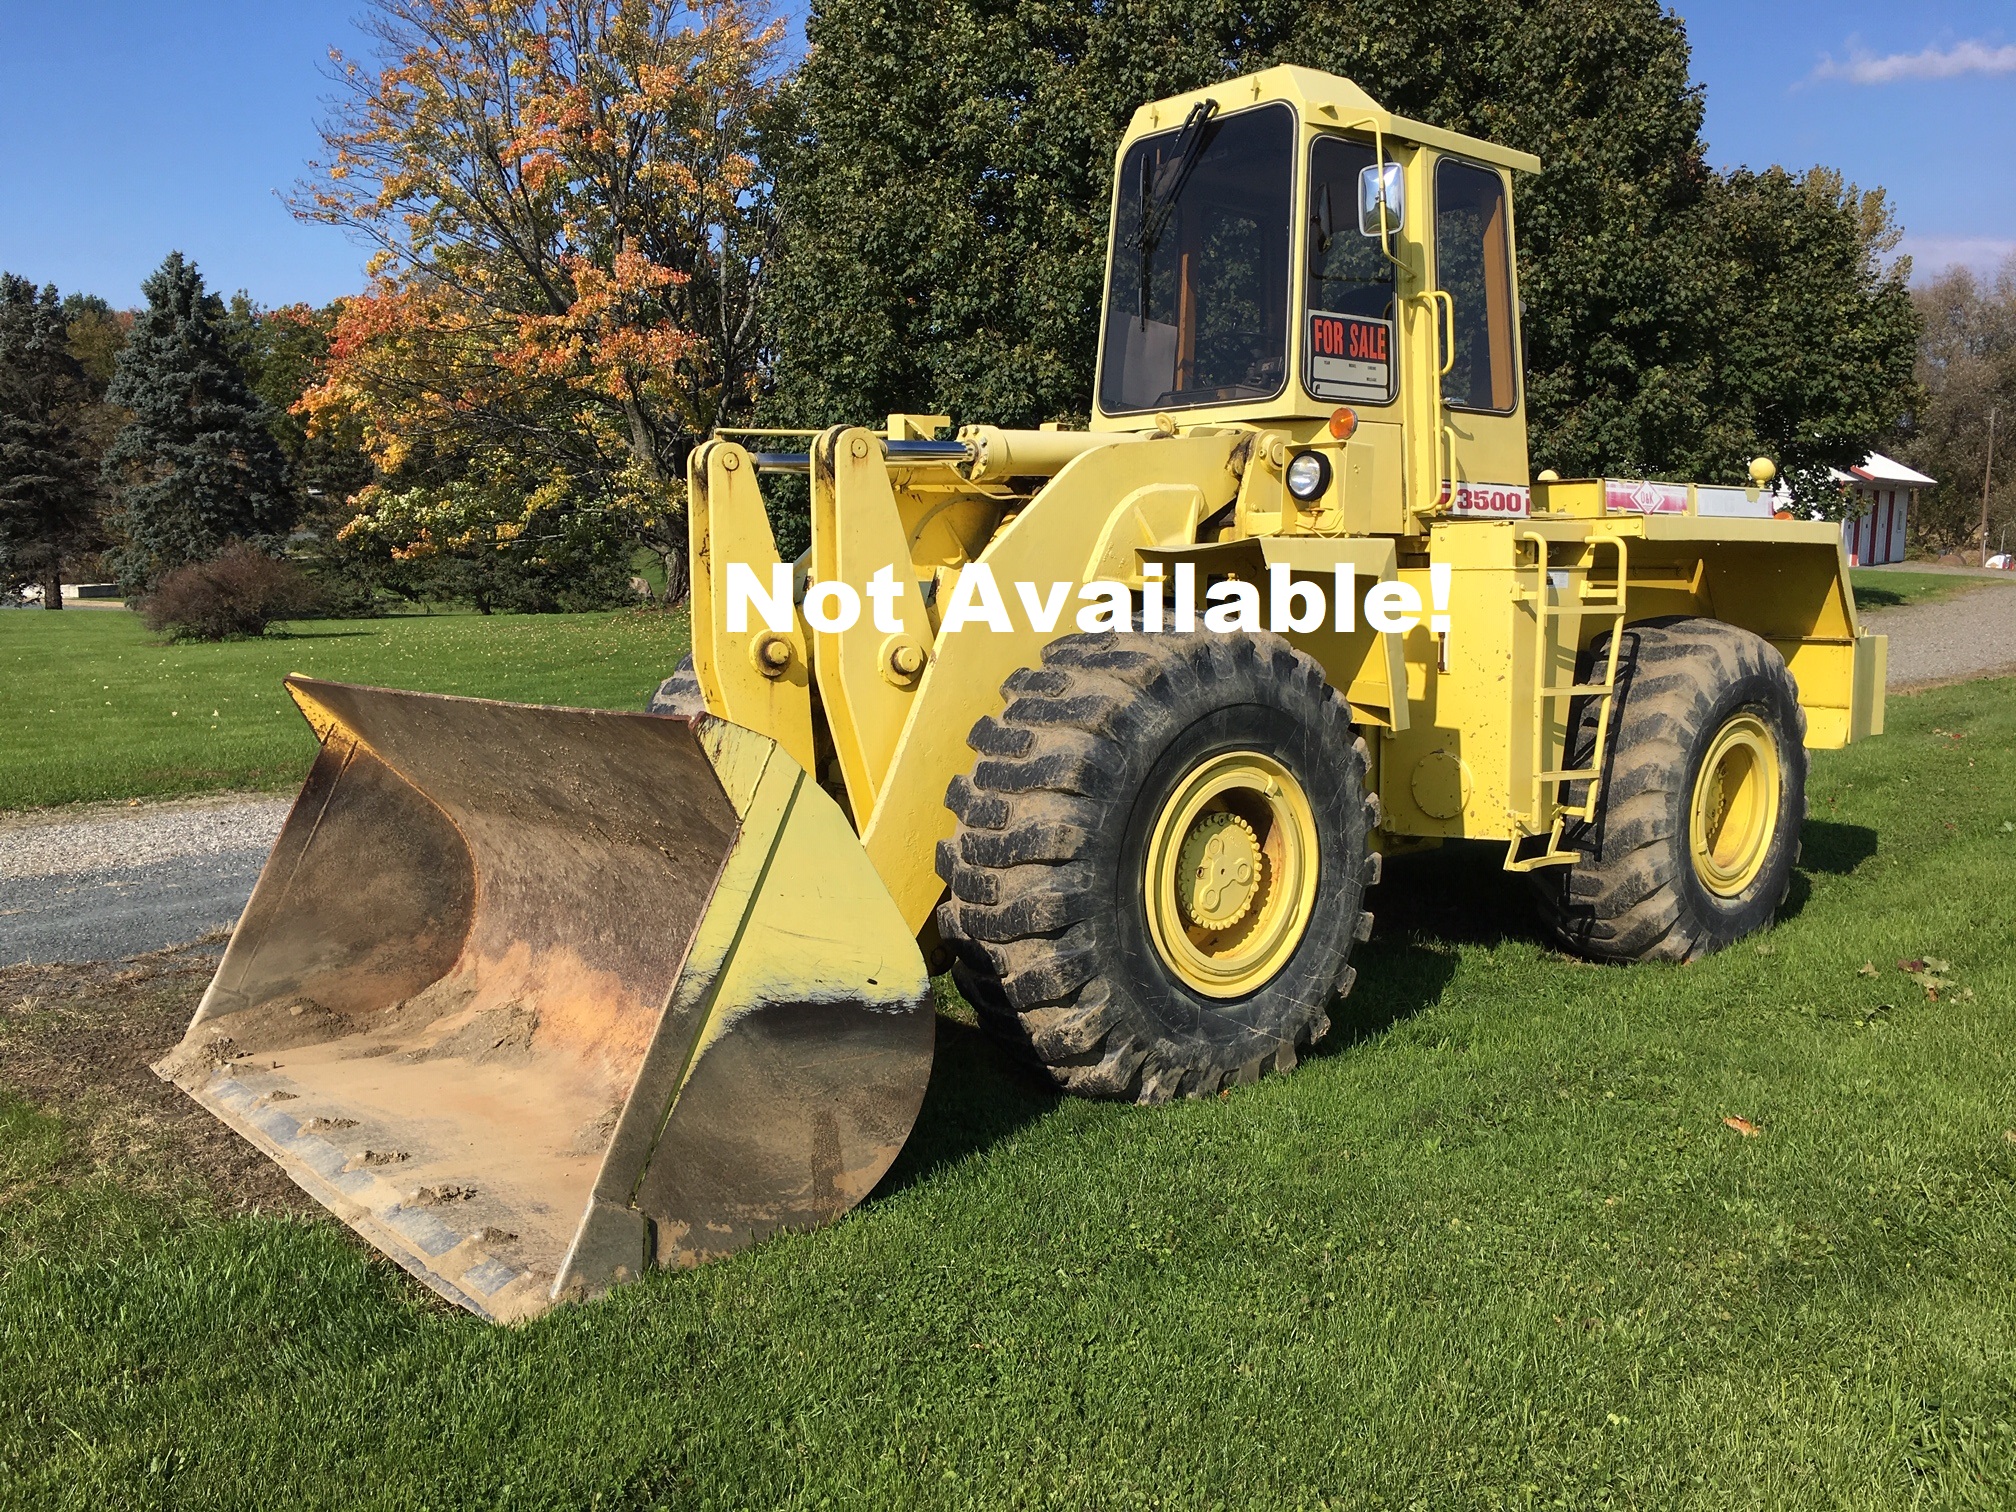 1987 Trojan 3500 Z articulated rubber tire bucket wheel loader. The loader is 4 wheel drive and is powered by a V8 - Deutz engine with 5060 hours. The Trojan 3500 Z has new breaks, a 3.7 yard bucket, a heated cab, all glass is in good condition. It has been a one owner piece of equipment and is a good clean well maintained machine ready to go!